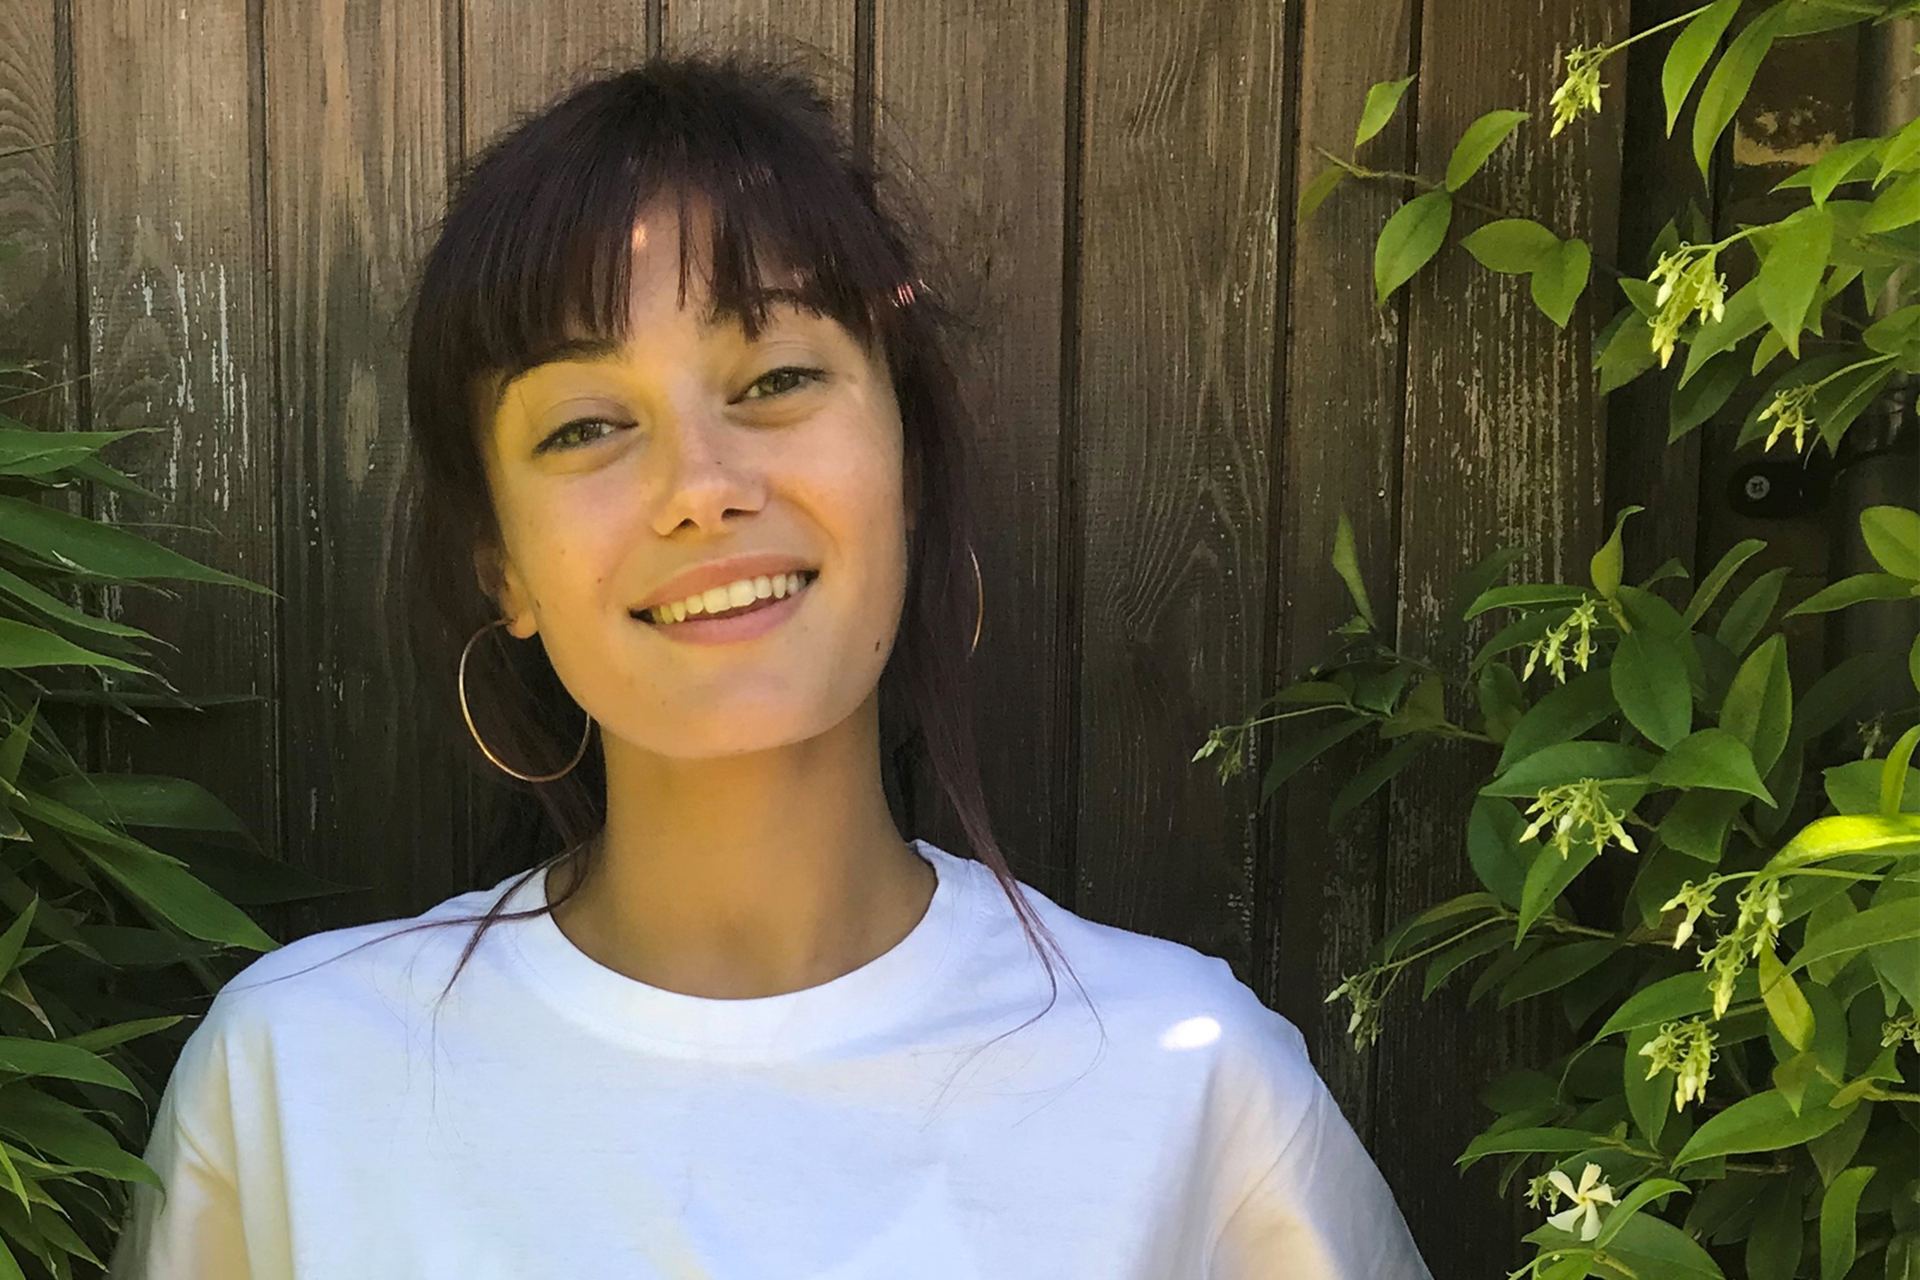 Ella Purnell smiling and wearing a white T-shirt in the garden.